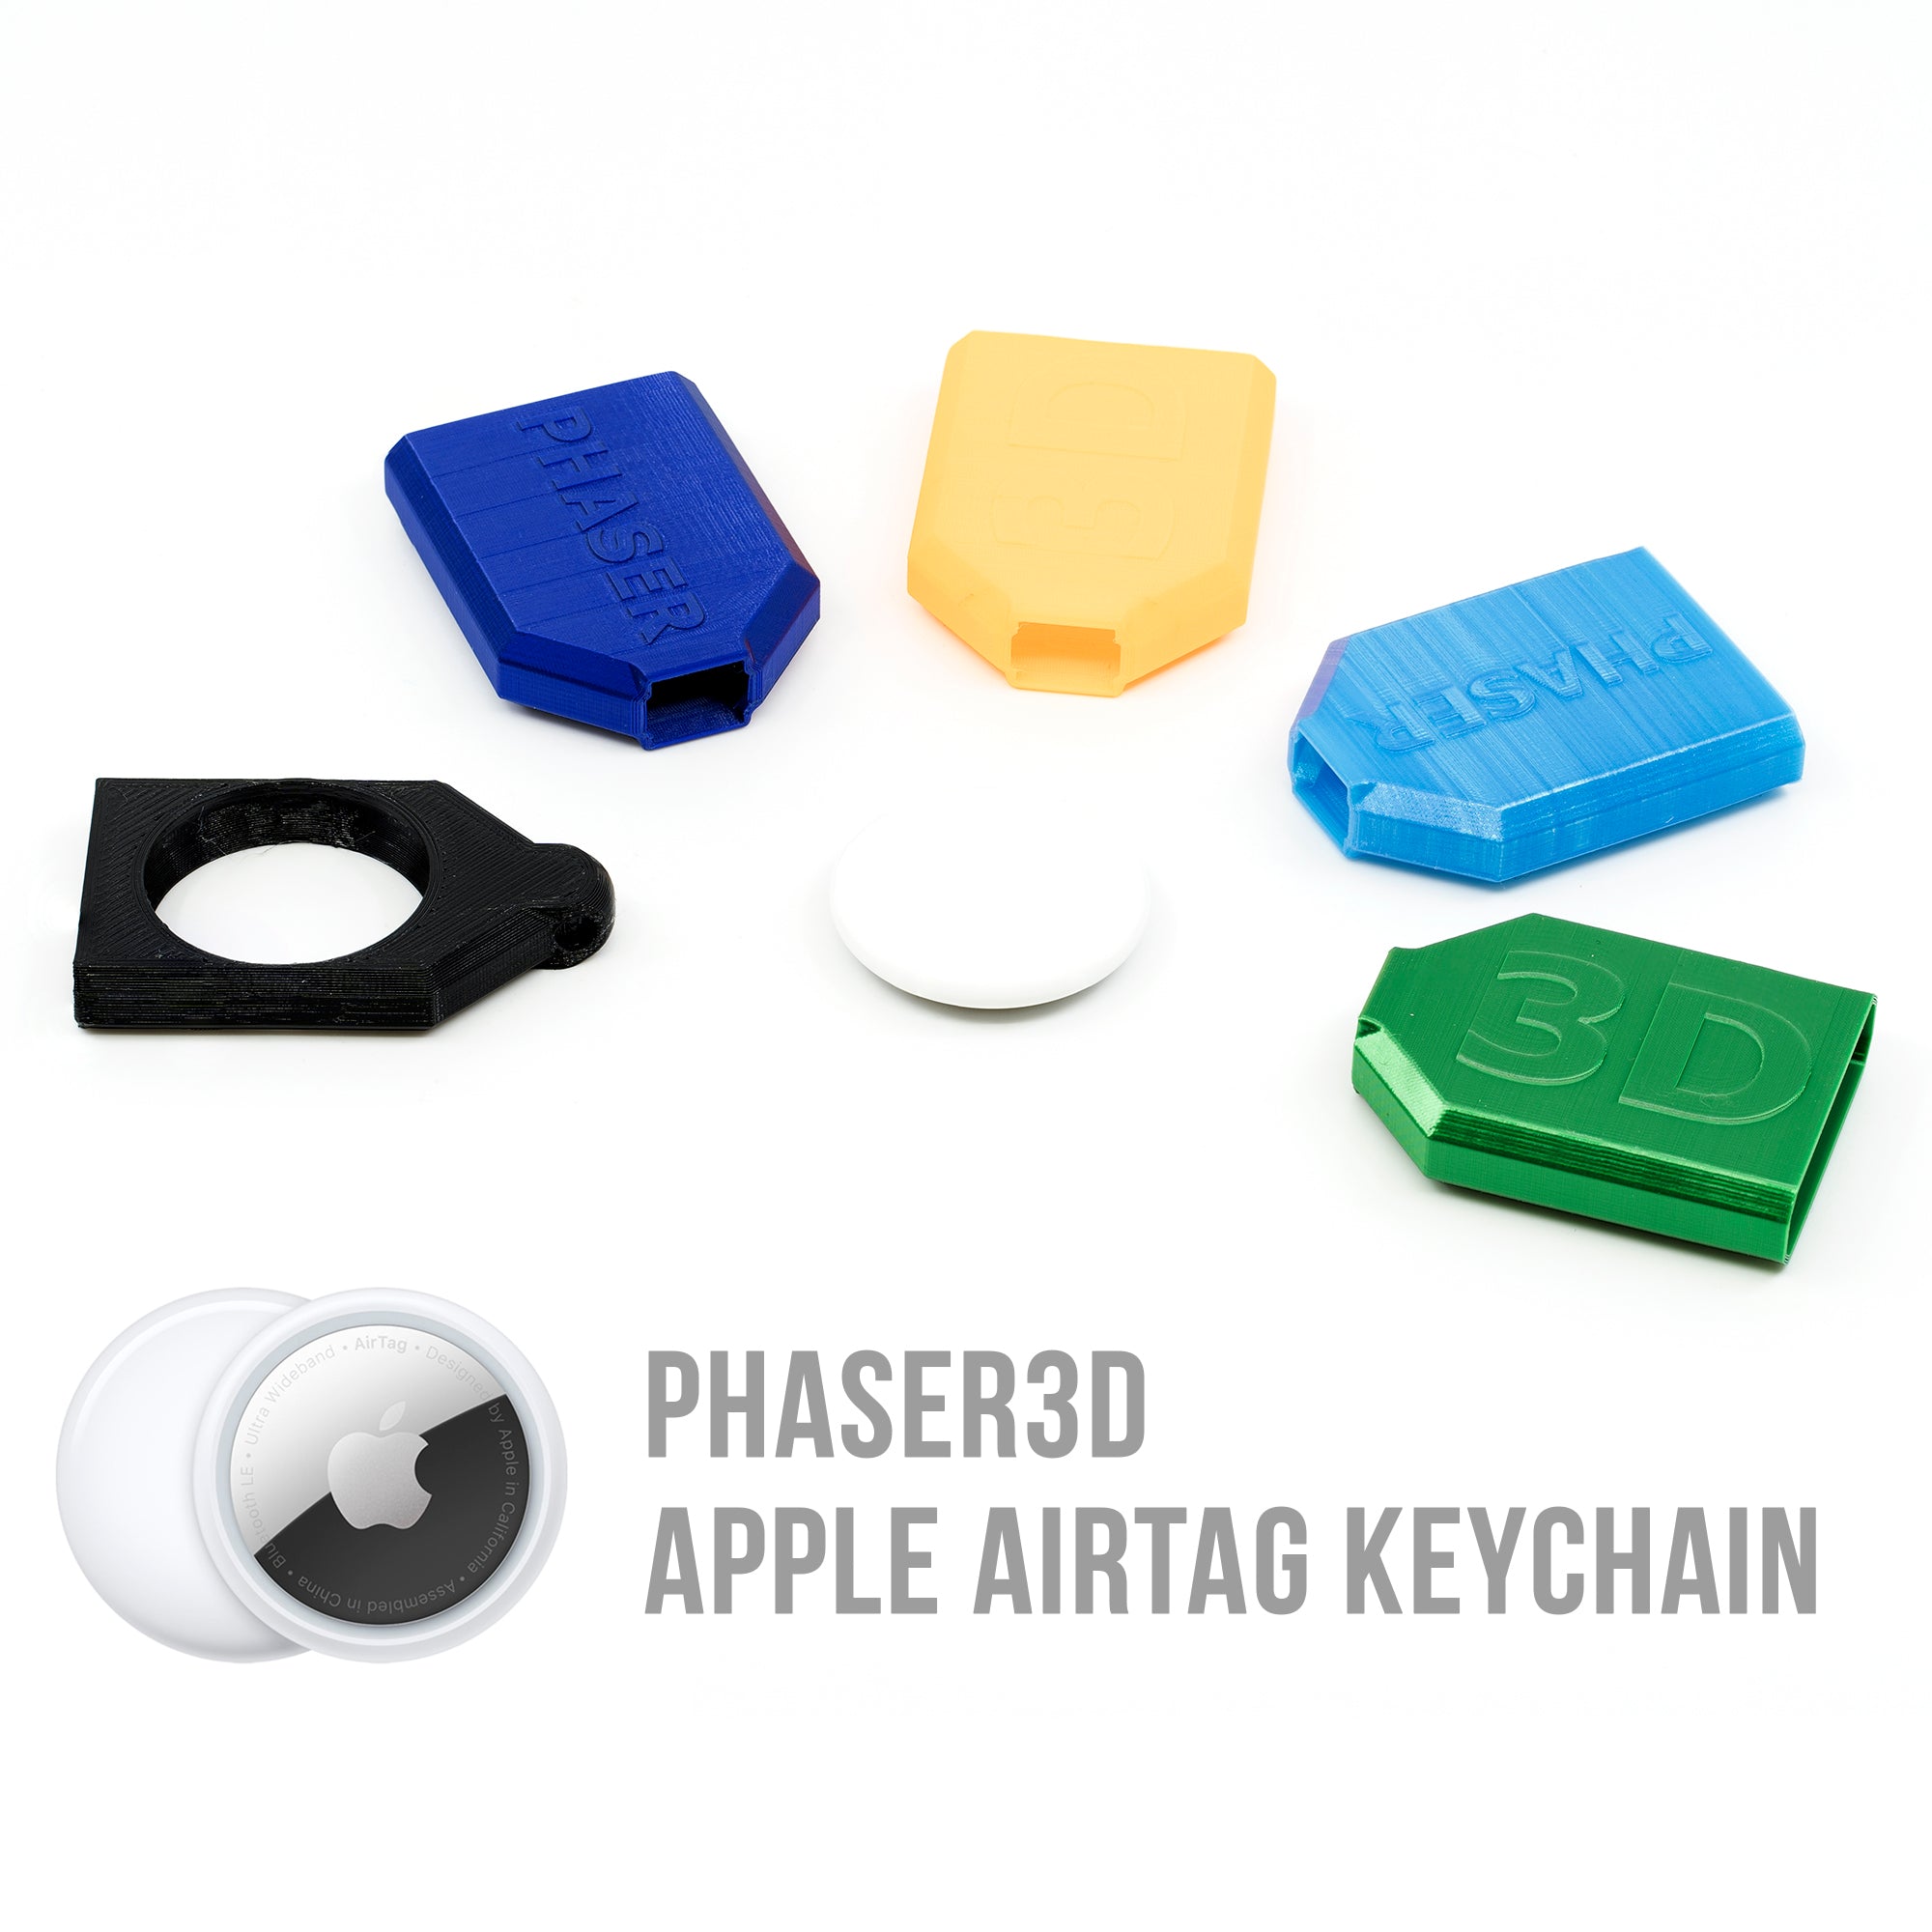 Phaser3D Concealed Air Tag Keychain Holder